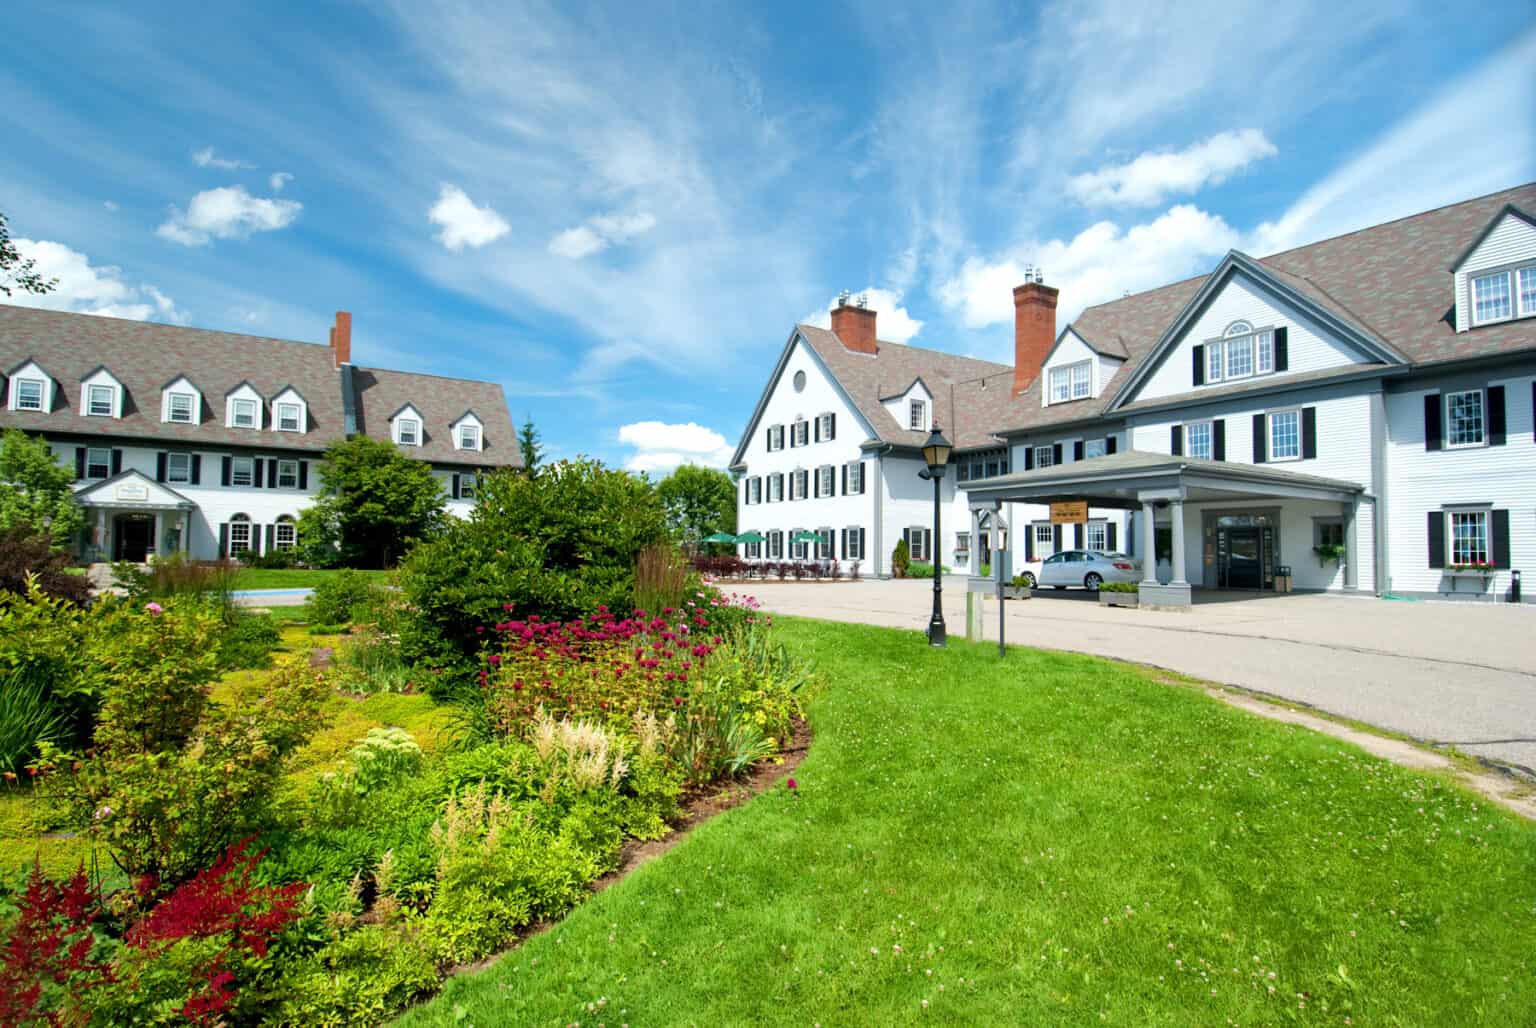 15 Best Hotels in Vermont for An Incredible Stay New England With Love